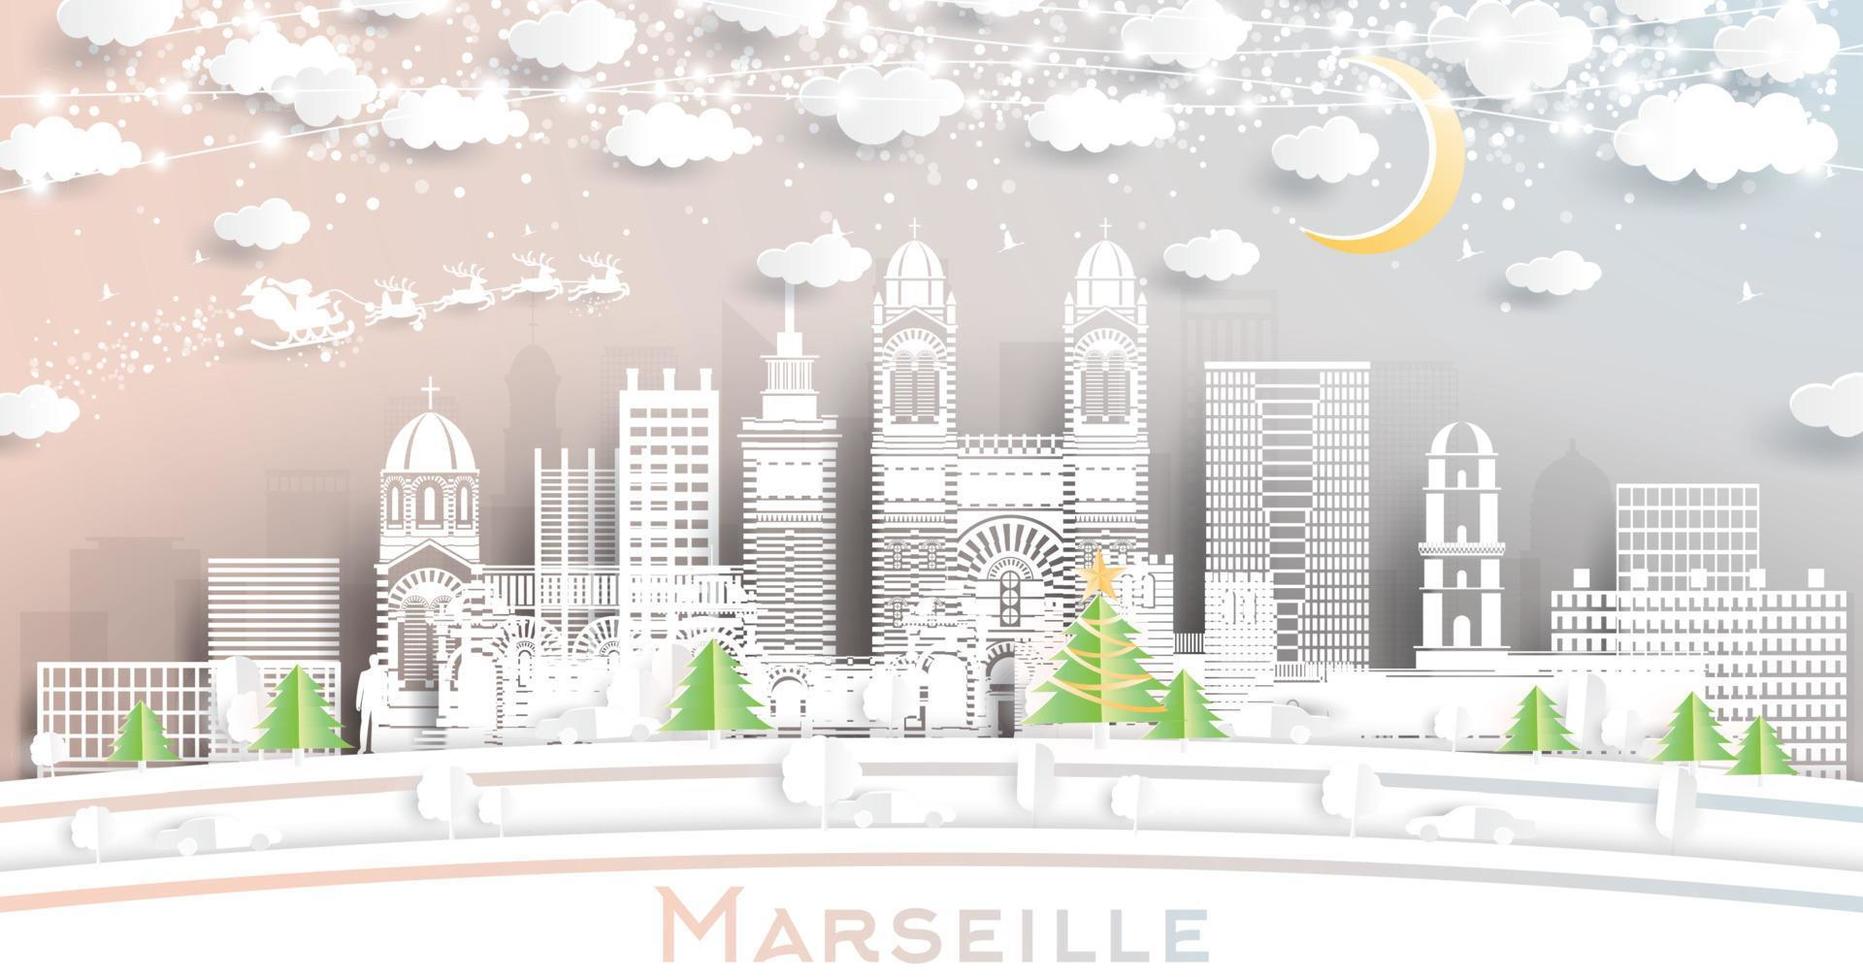 Marseille France City Skyline in Paper Cut Style with Snowflakes, Moon and Neon Garland. vector